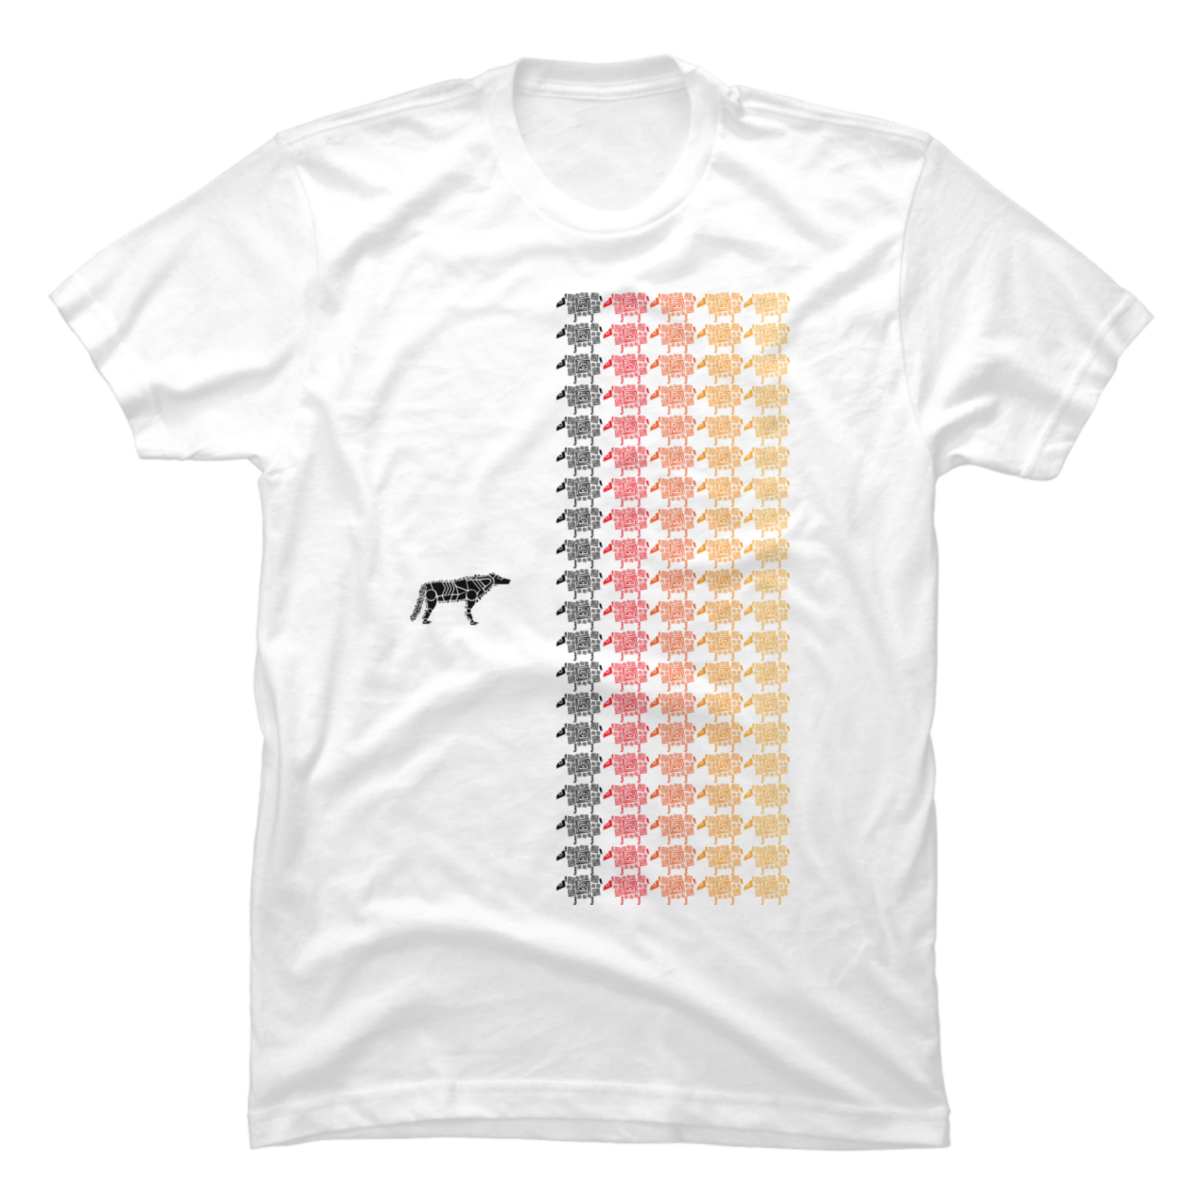 strength in numbers t shirt